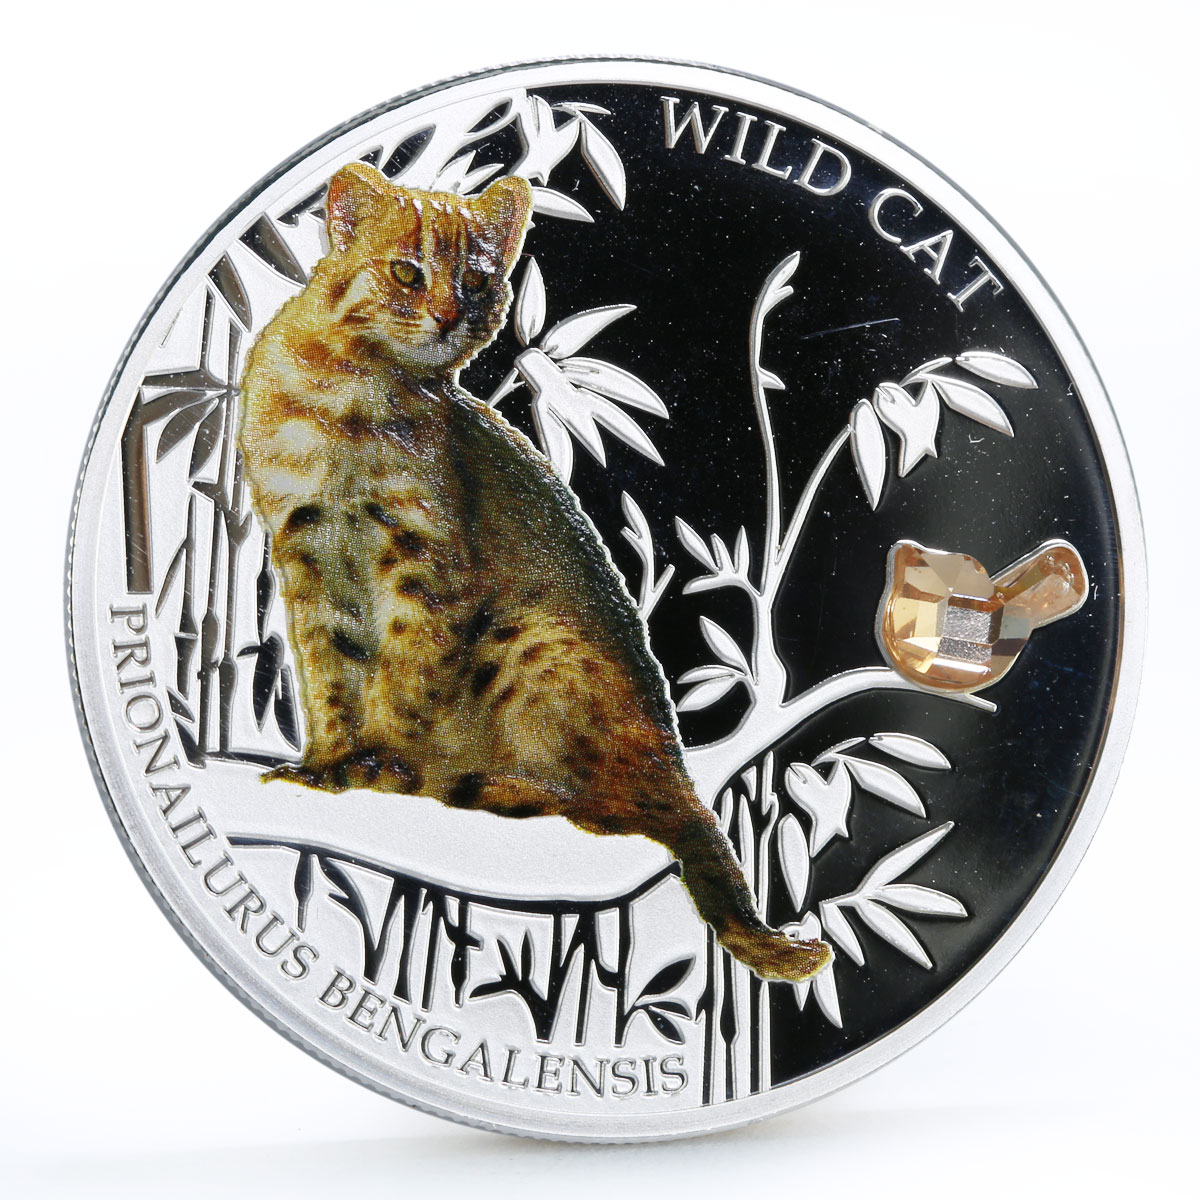 Fiji 2 dollars Small Cats series Wild Leopard Cat Pet colored silver coin 2013